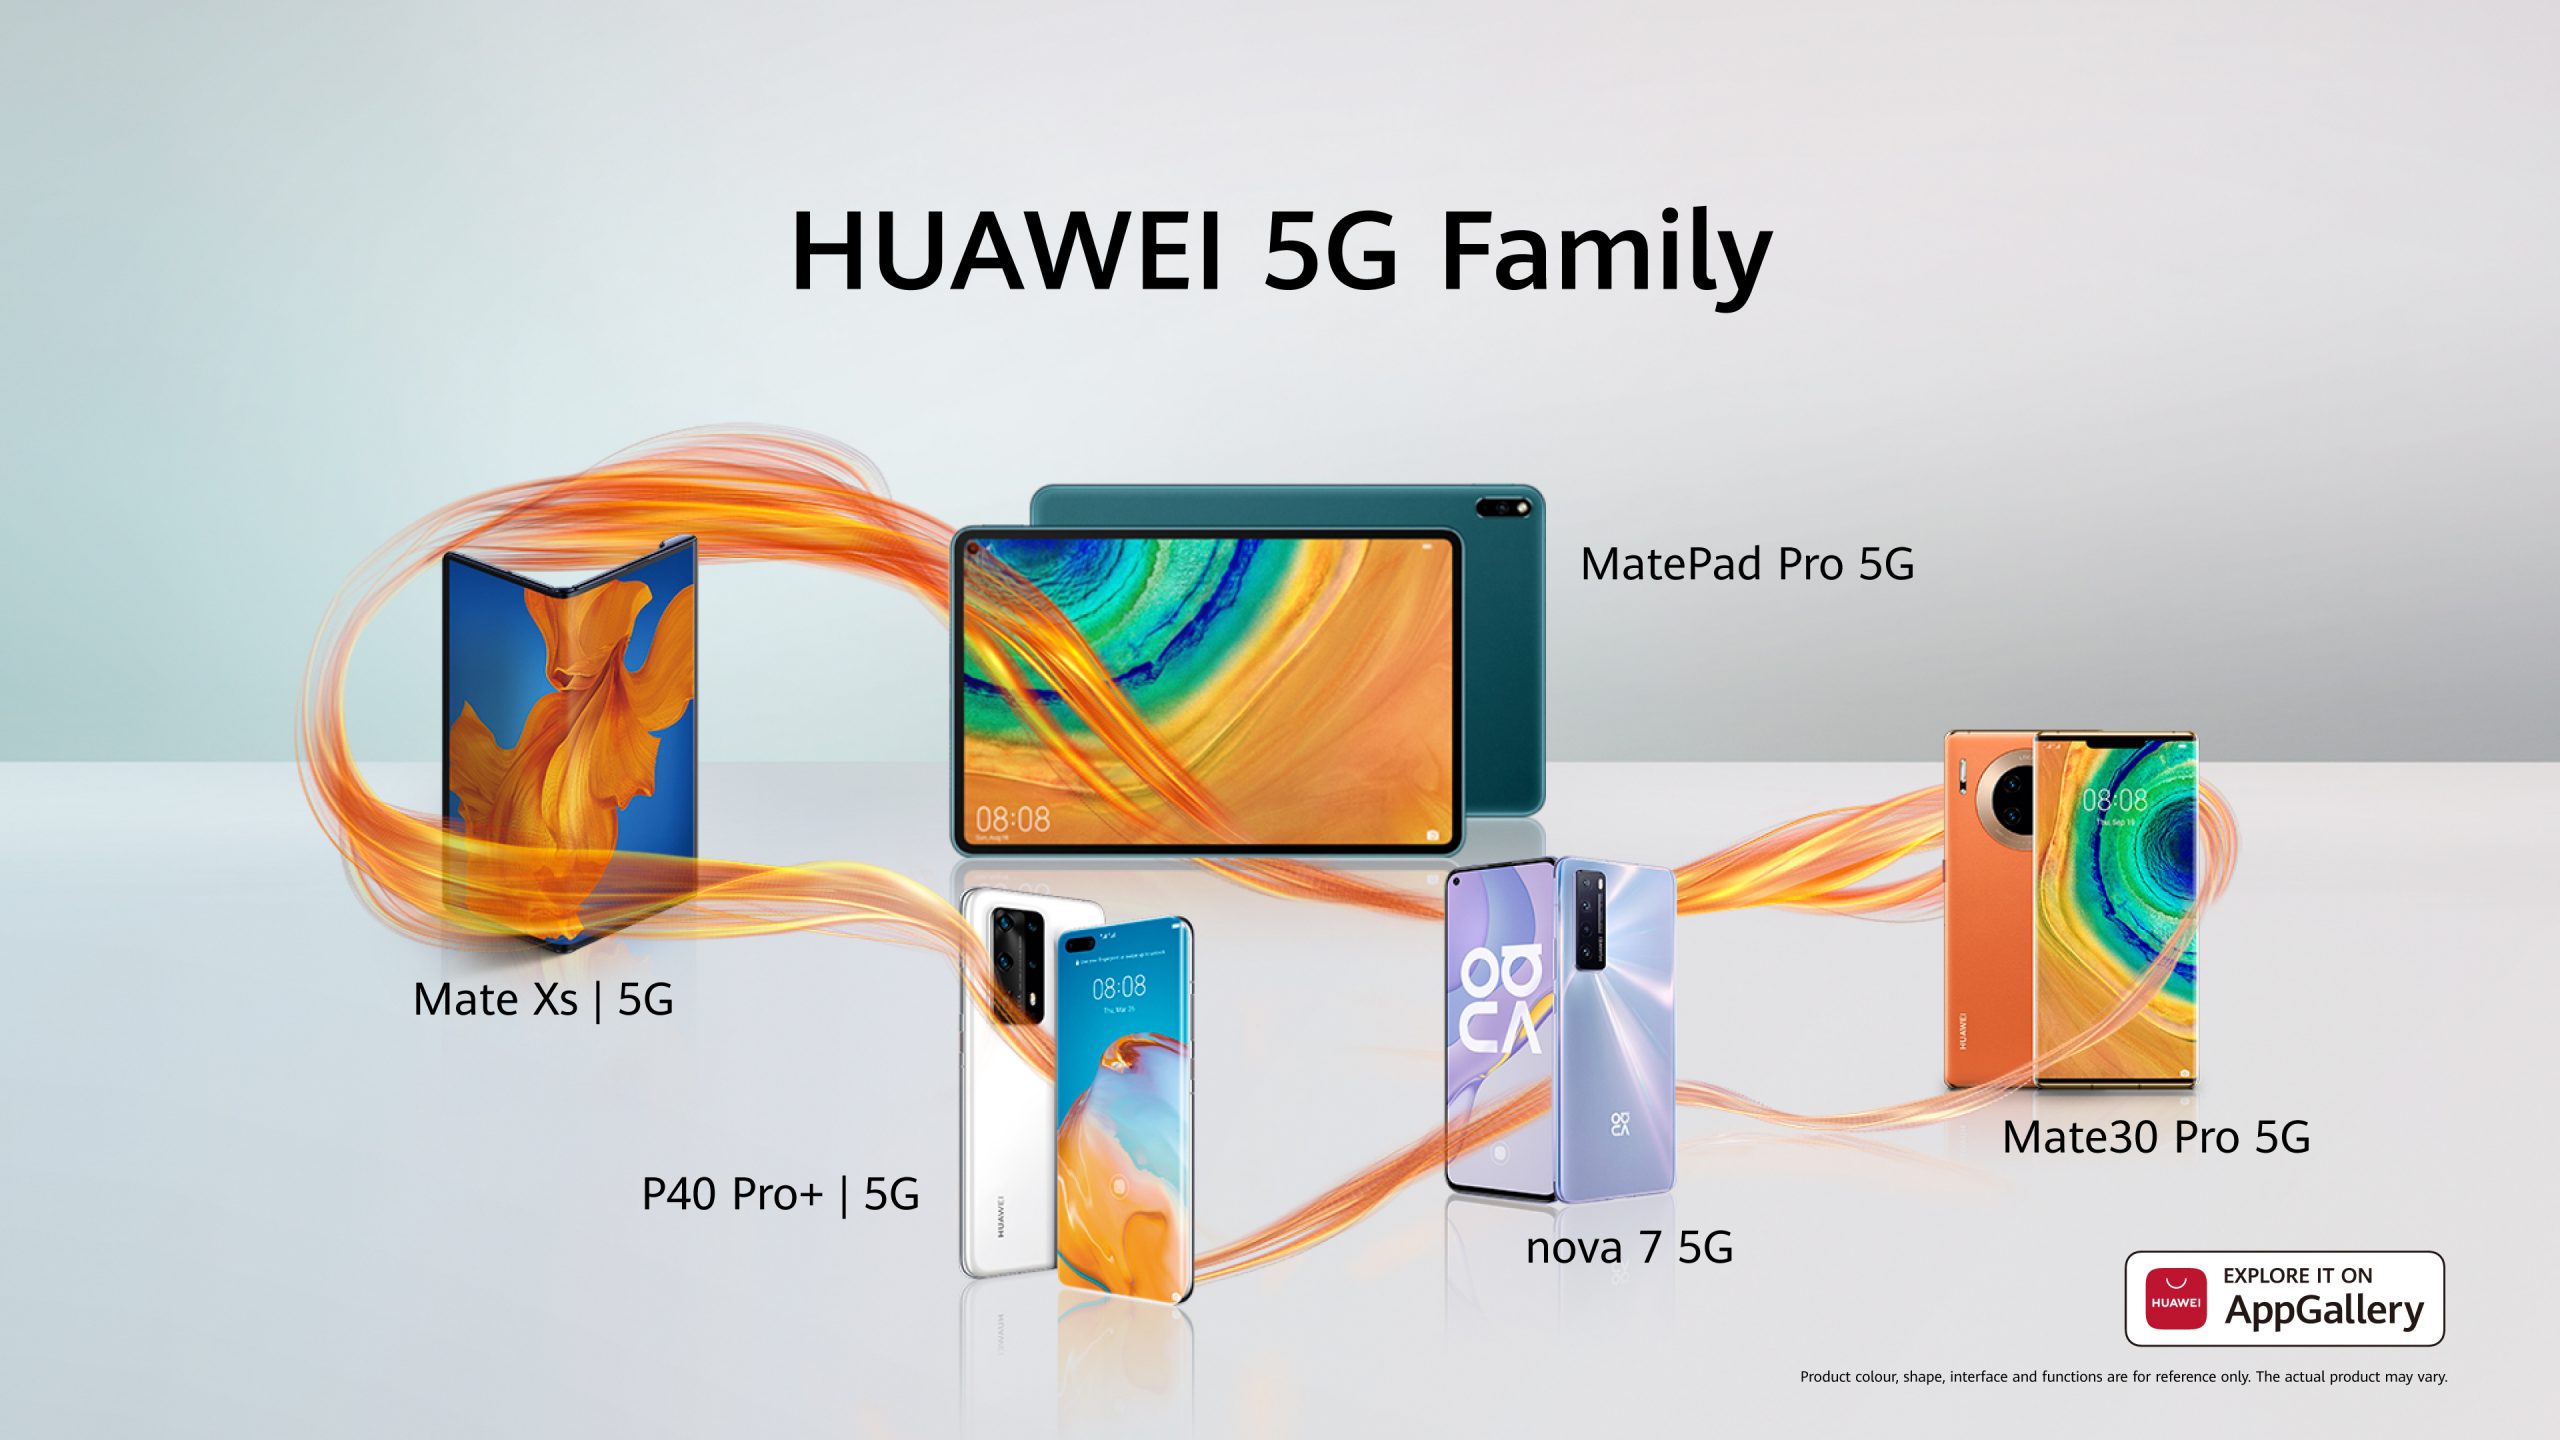 5G Innovations: How Huawei Introduced A 5G Family With Its Product Lineup In UAE